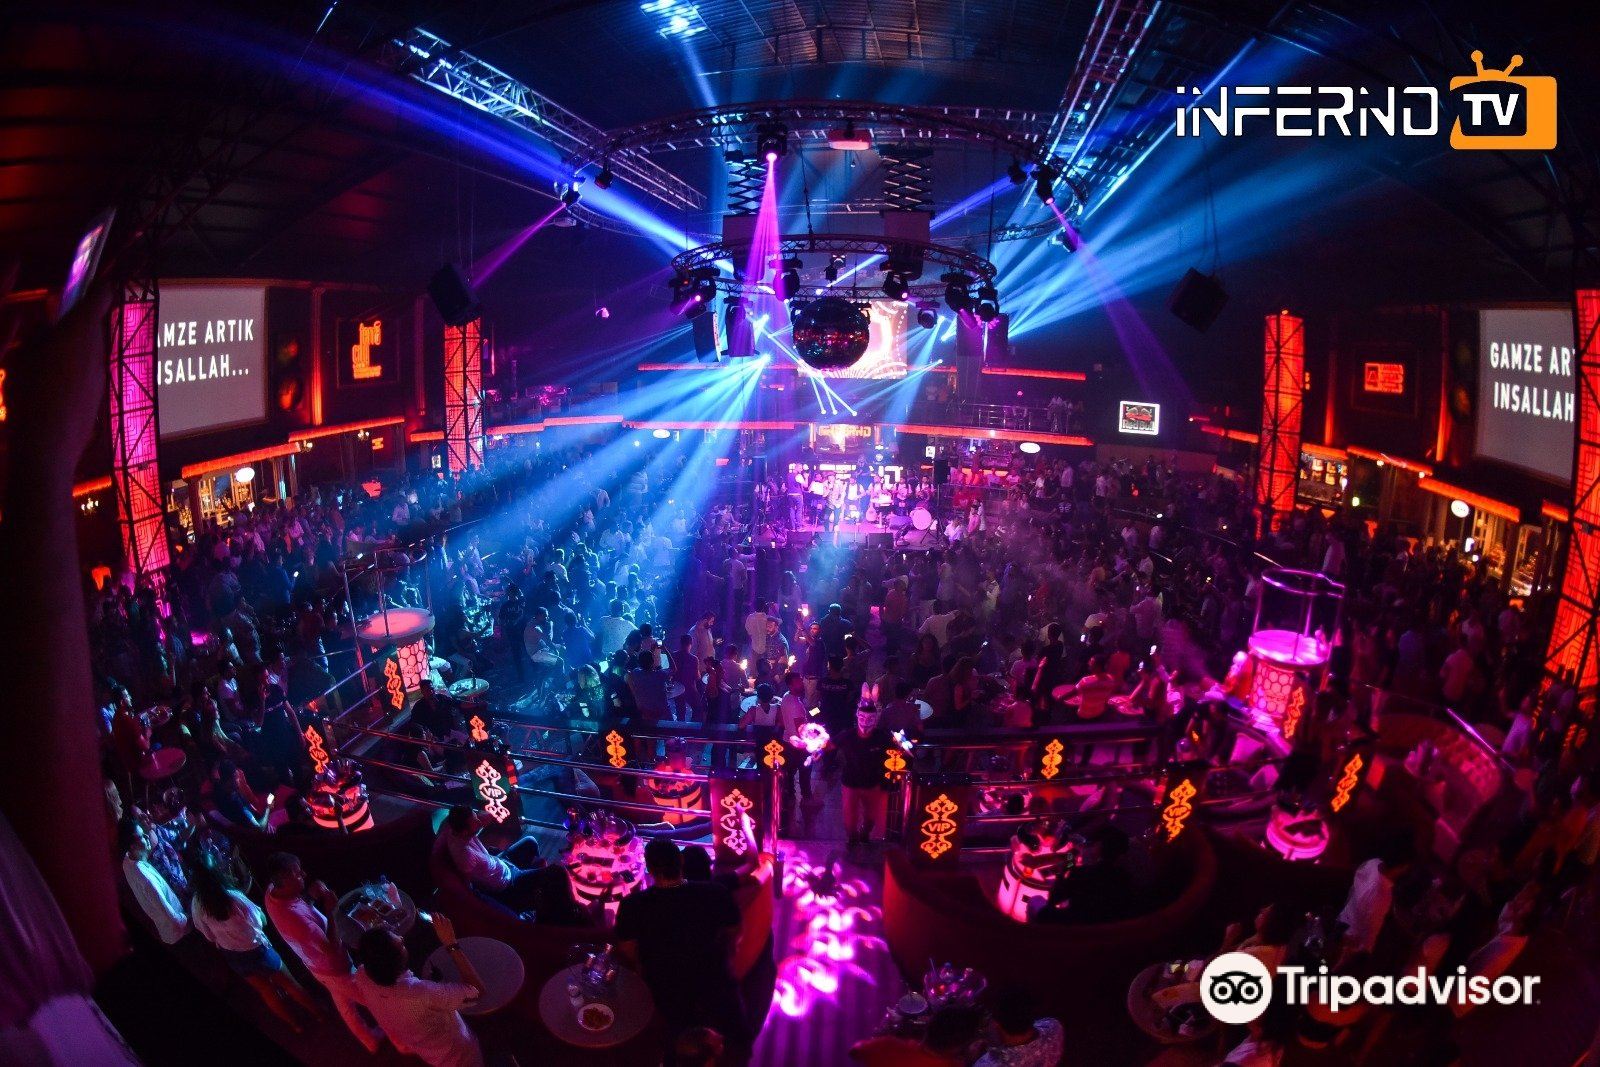 Club Inferno Mania Kemer attraction reviews - Club Inferno Mania Kemer  tickets - Club Inferno Mania Kemer discounts - Club Inferno Mania Kemer  transportation, address, opening hours - attractions, hotels, and food